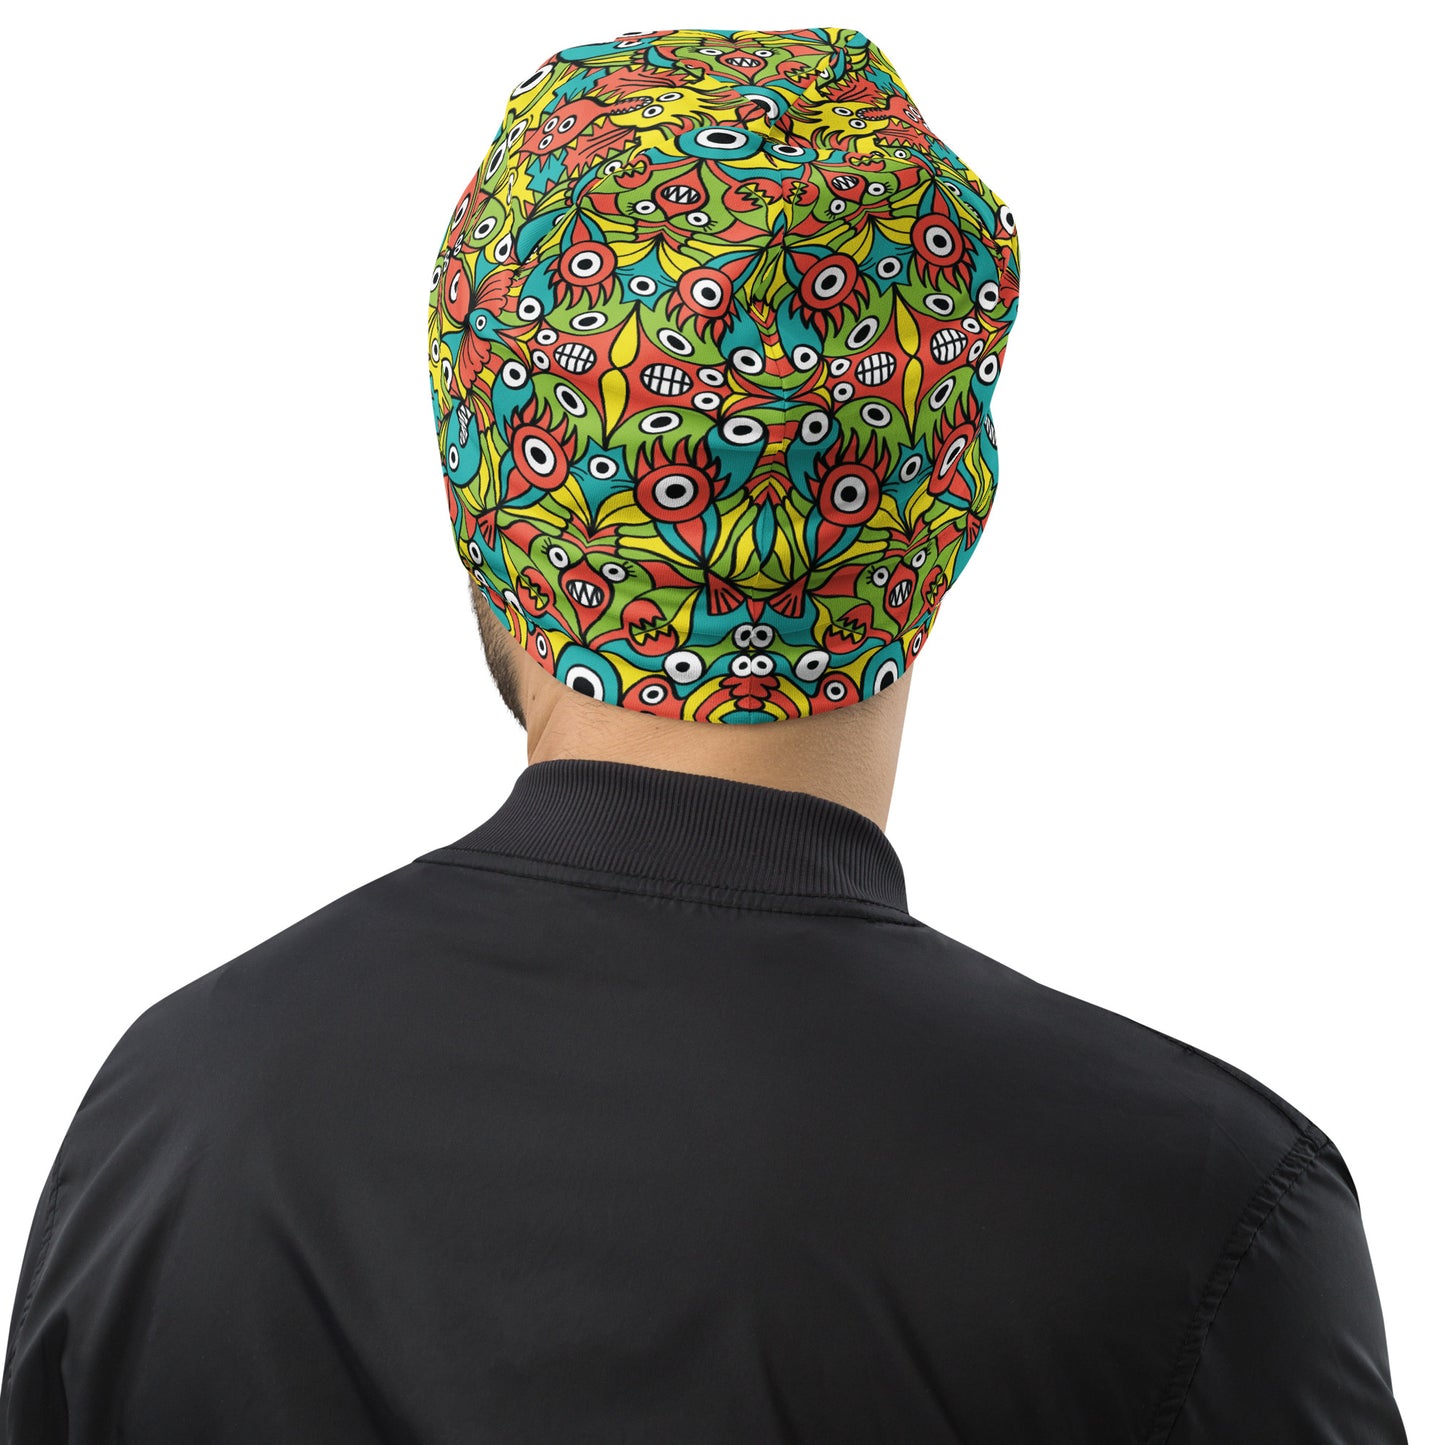 Alien monsters pattern design All-Over Print Beanie. Back view